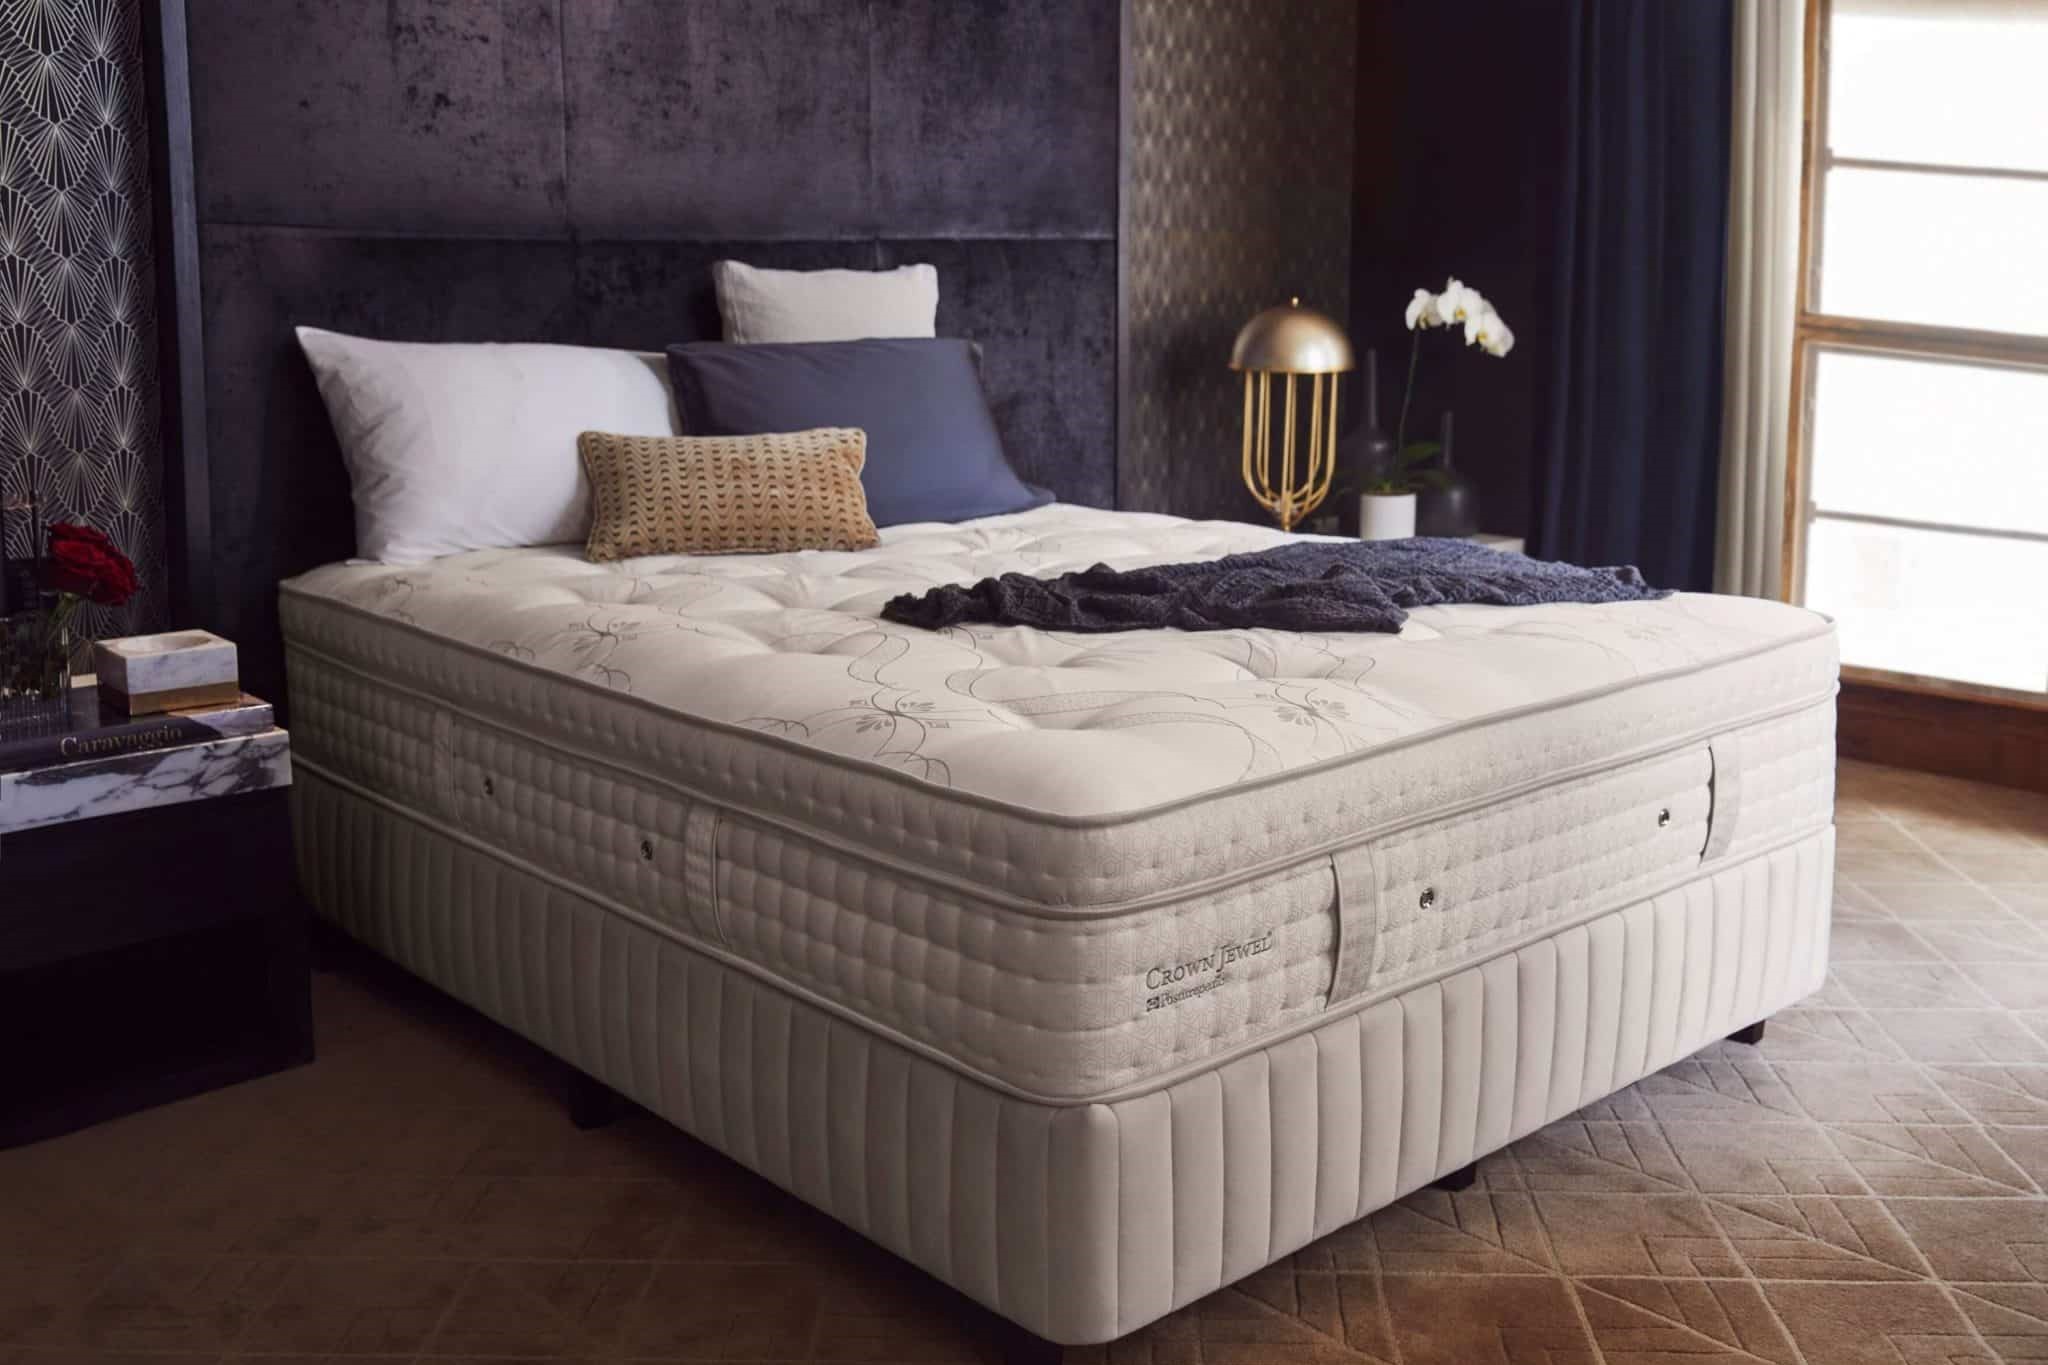 This Surprising Hack Will Change The Way You Use A King-Sized Mattress